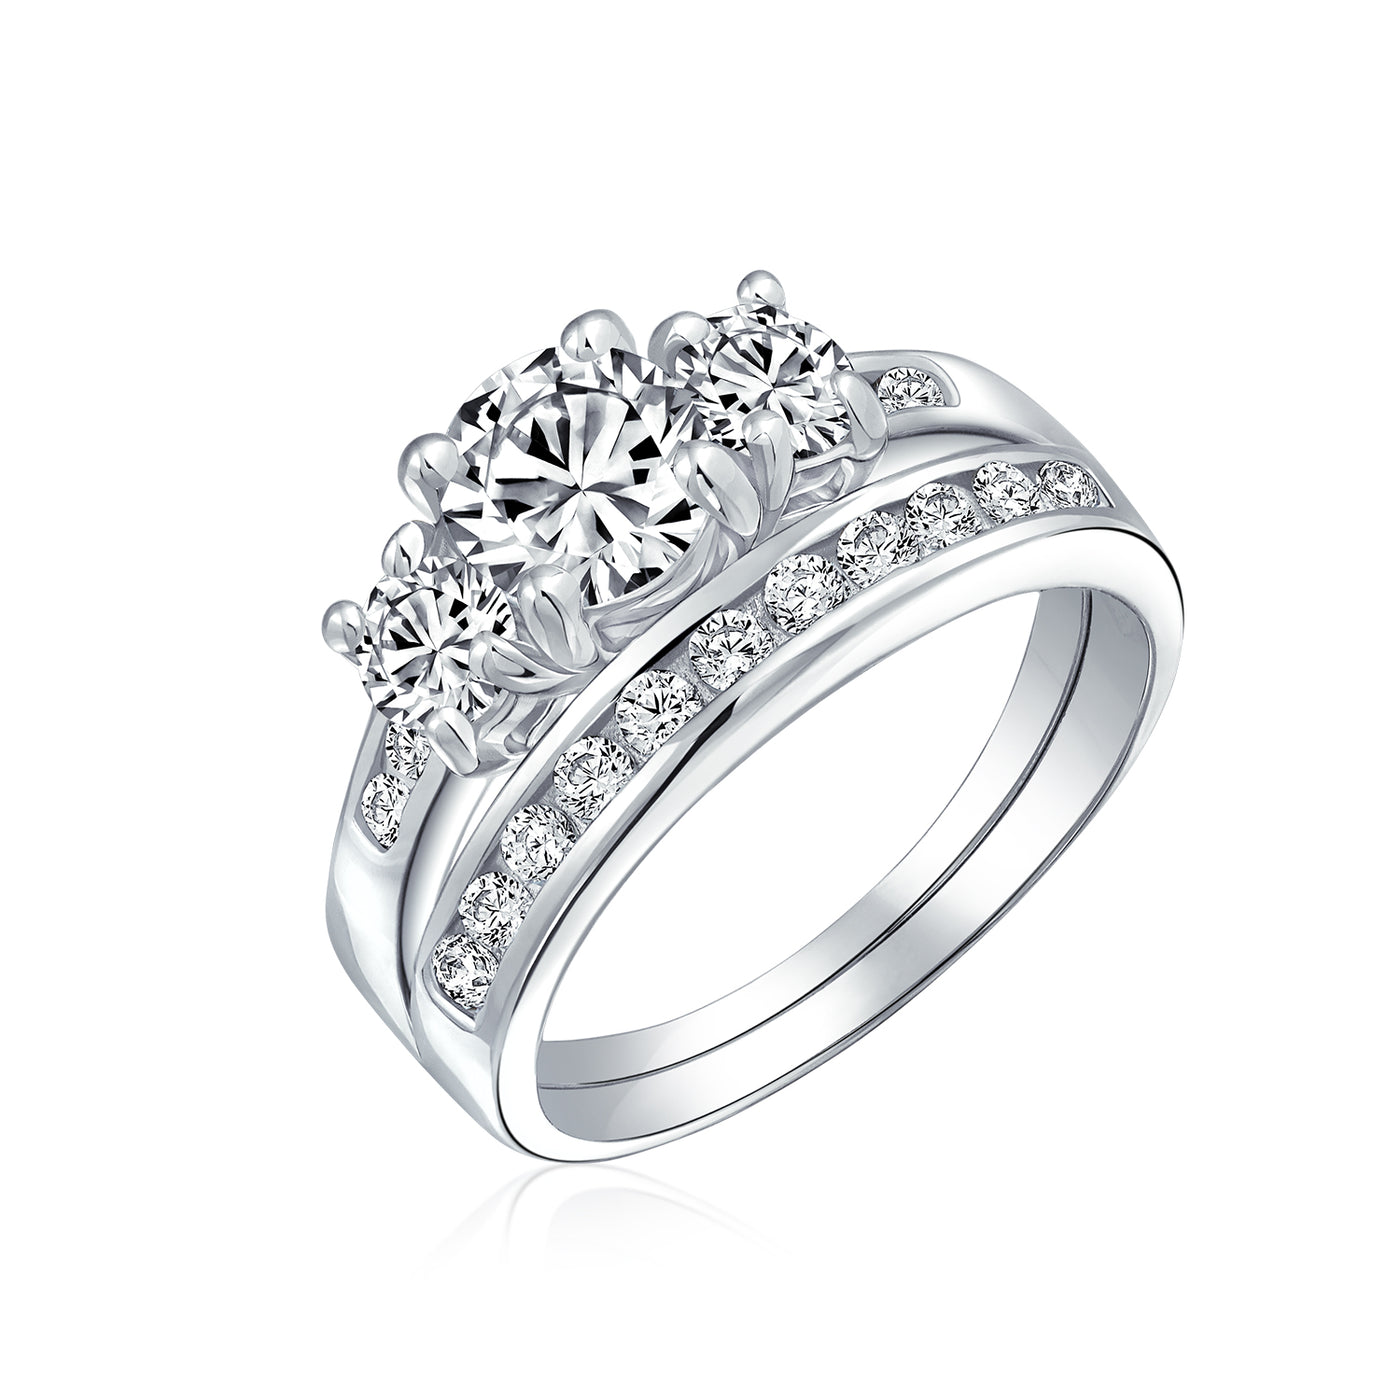 3CT Solitaire 3 Stone CZ Engagement Wedding Ring .925 Sterling Silver